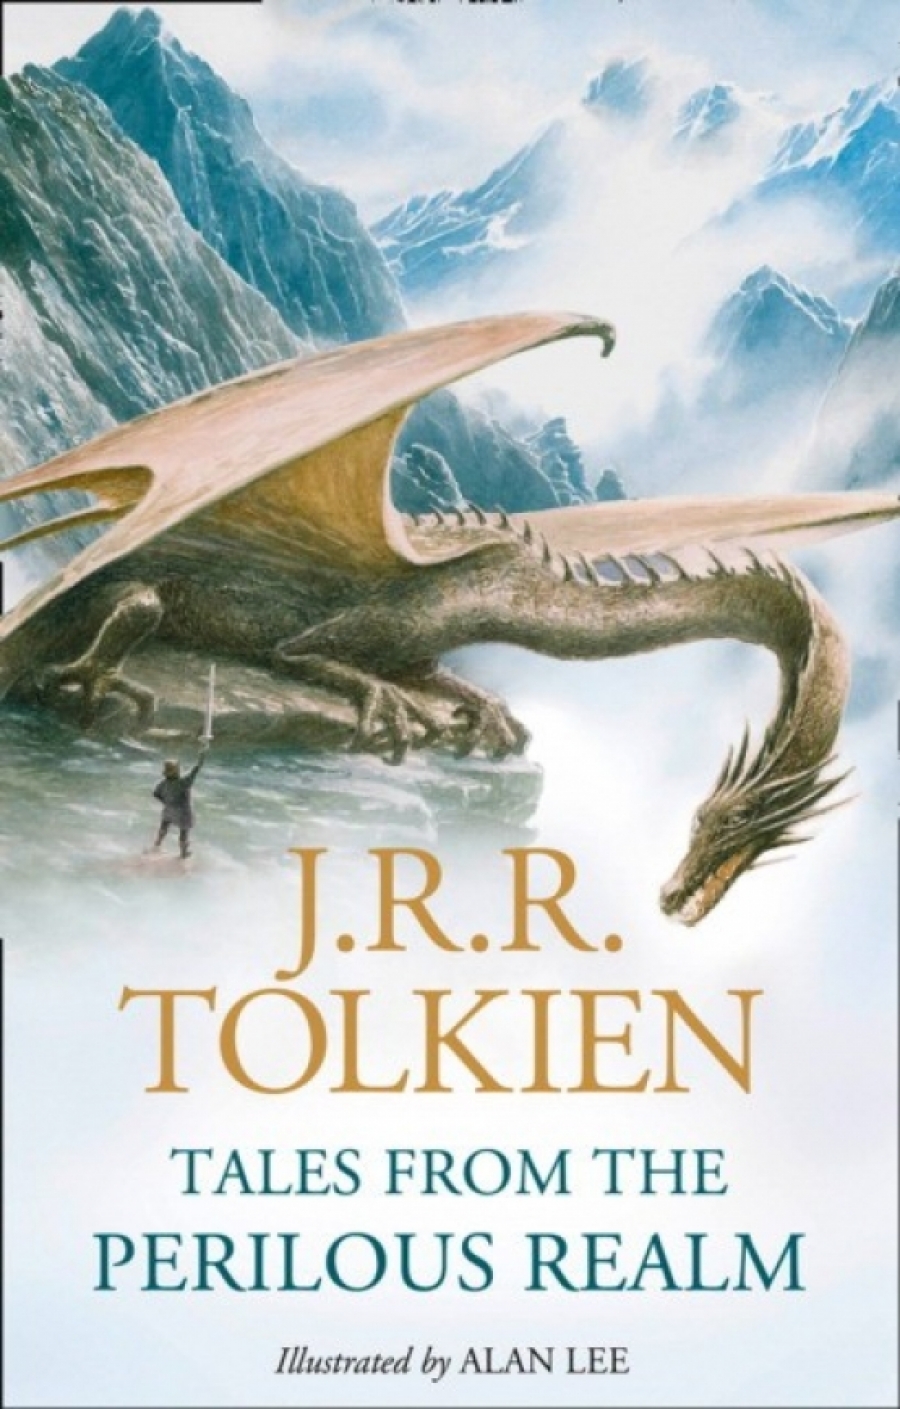 Tolkien J.R.R. Tales from the perilous realm 